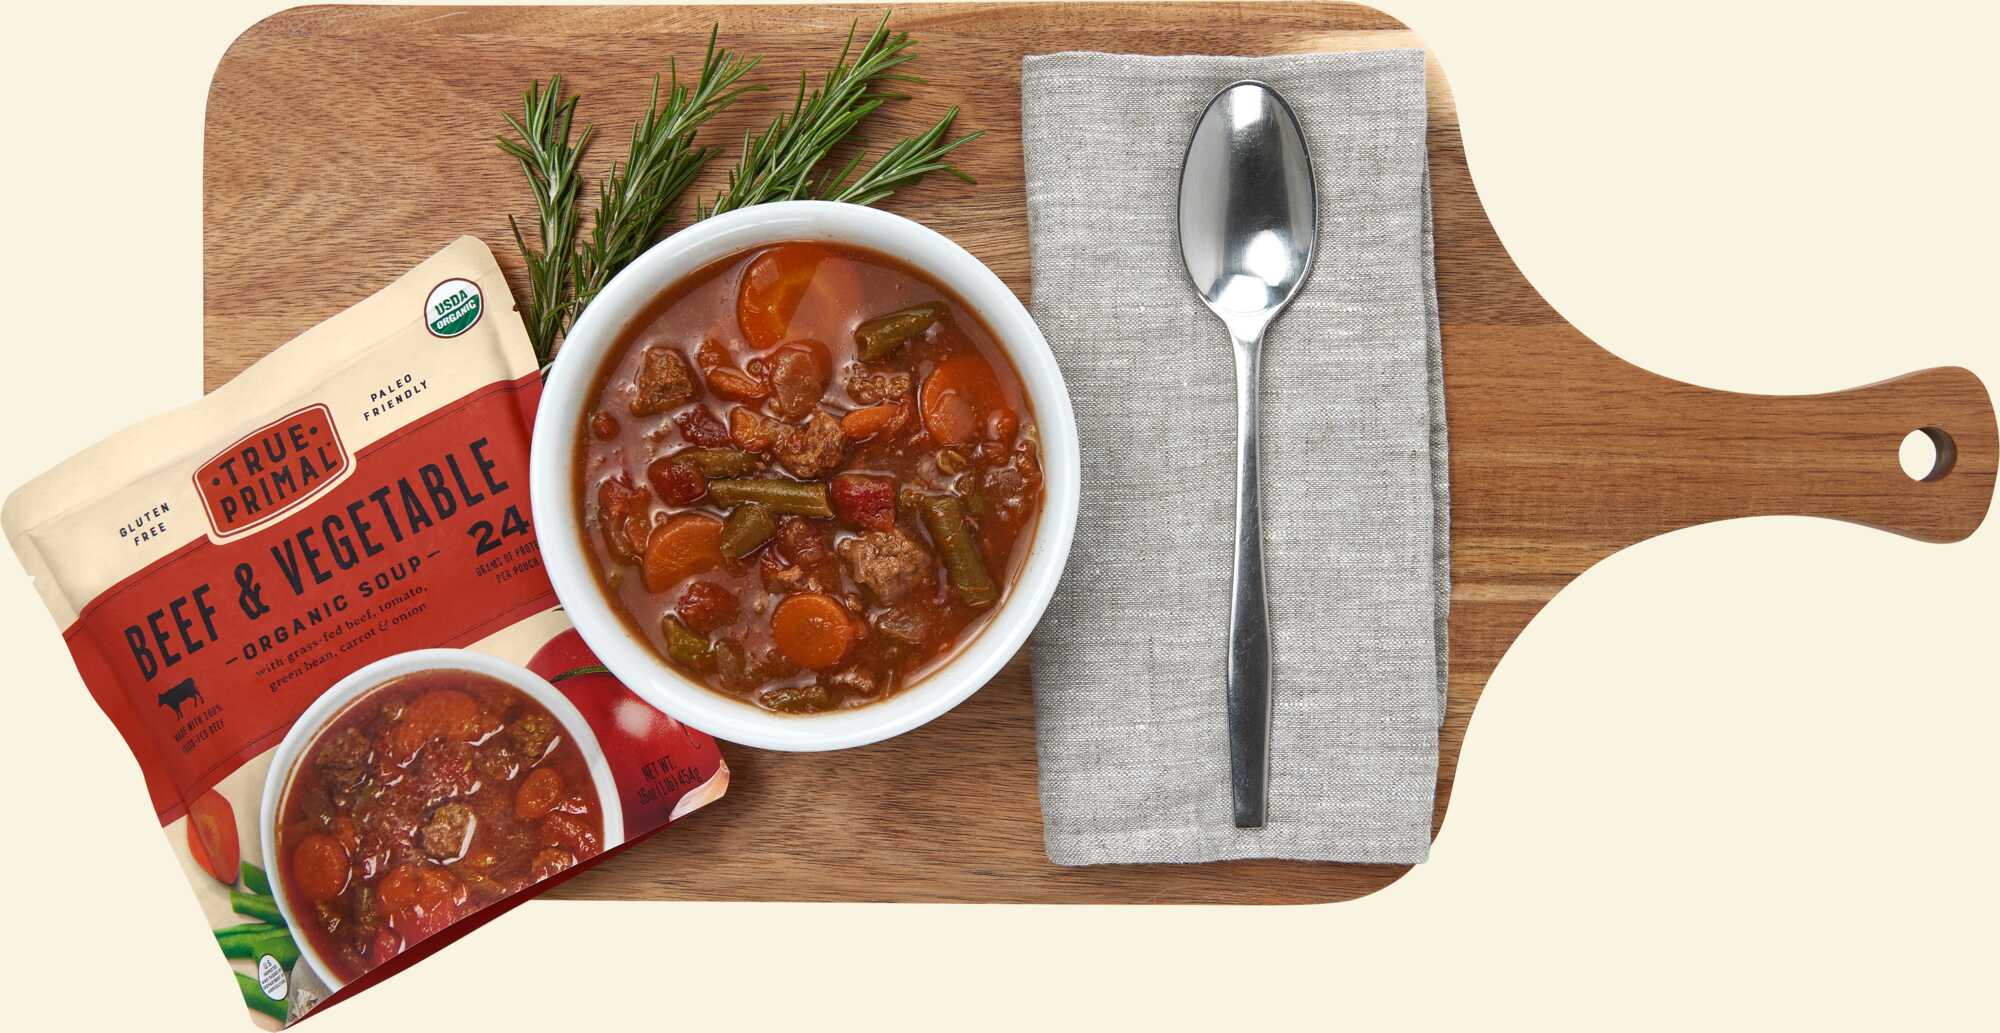 True Primal Beef and Vegetable Organic Soup on cutting board with spoon